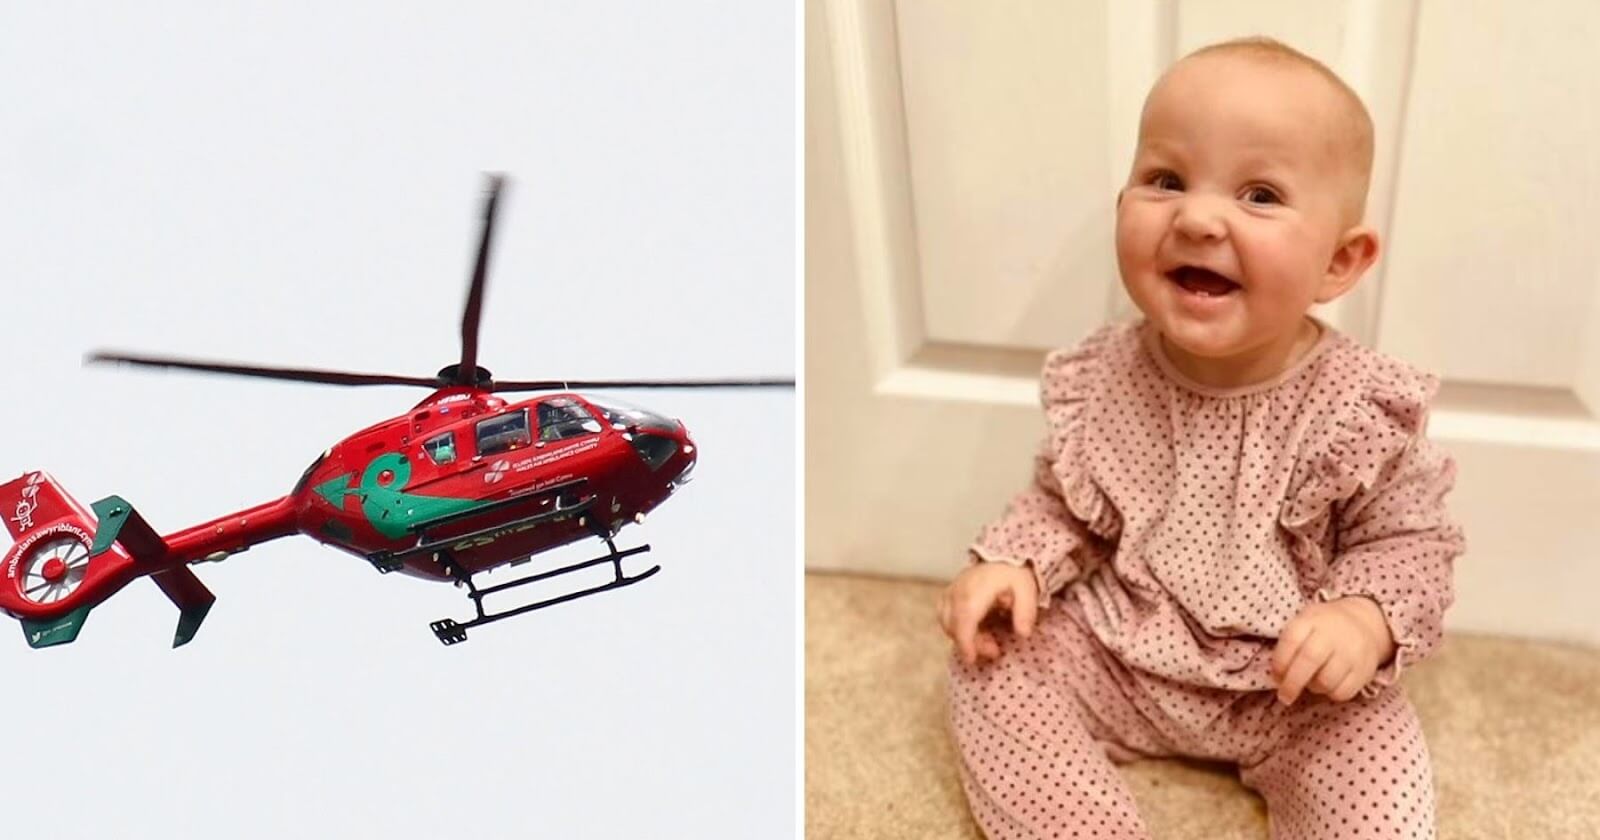 Parents of premature baby saved by airlift are fundraising for Wales Air Ambulance